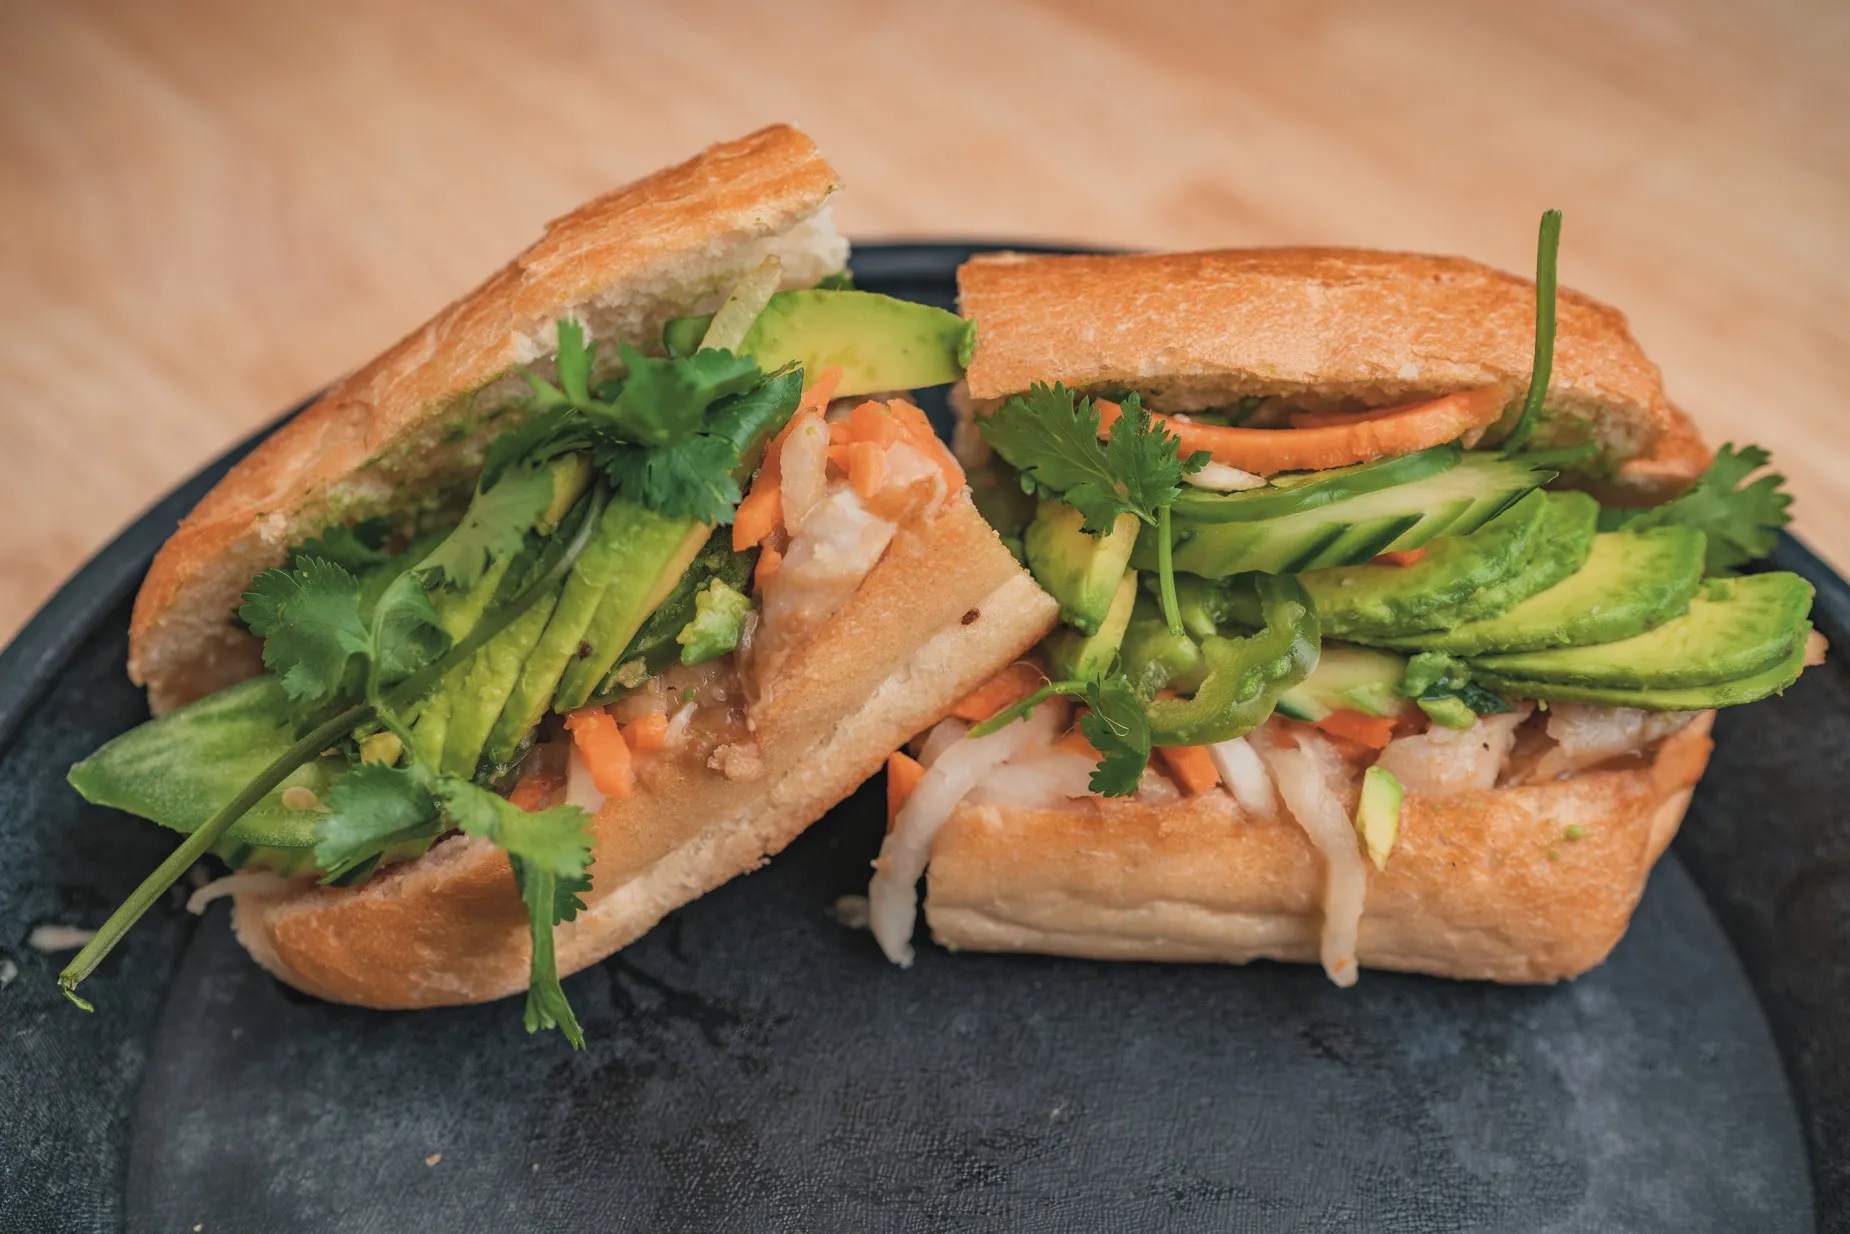 A banh mi loaded with avocado and vegetables.